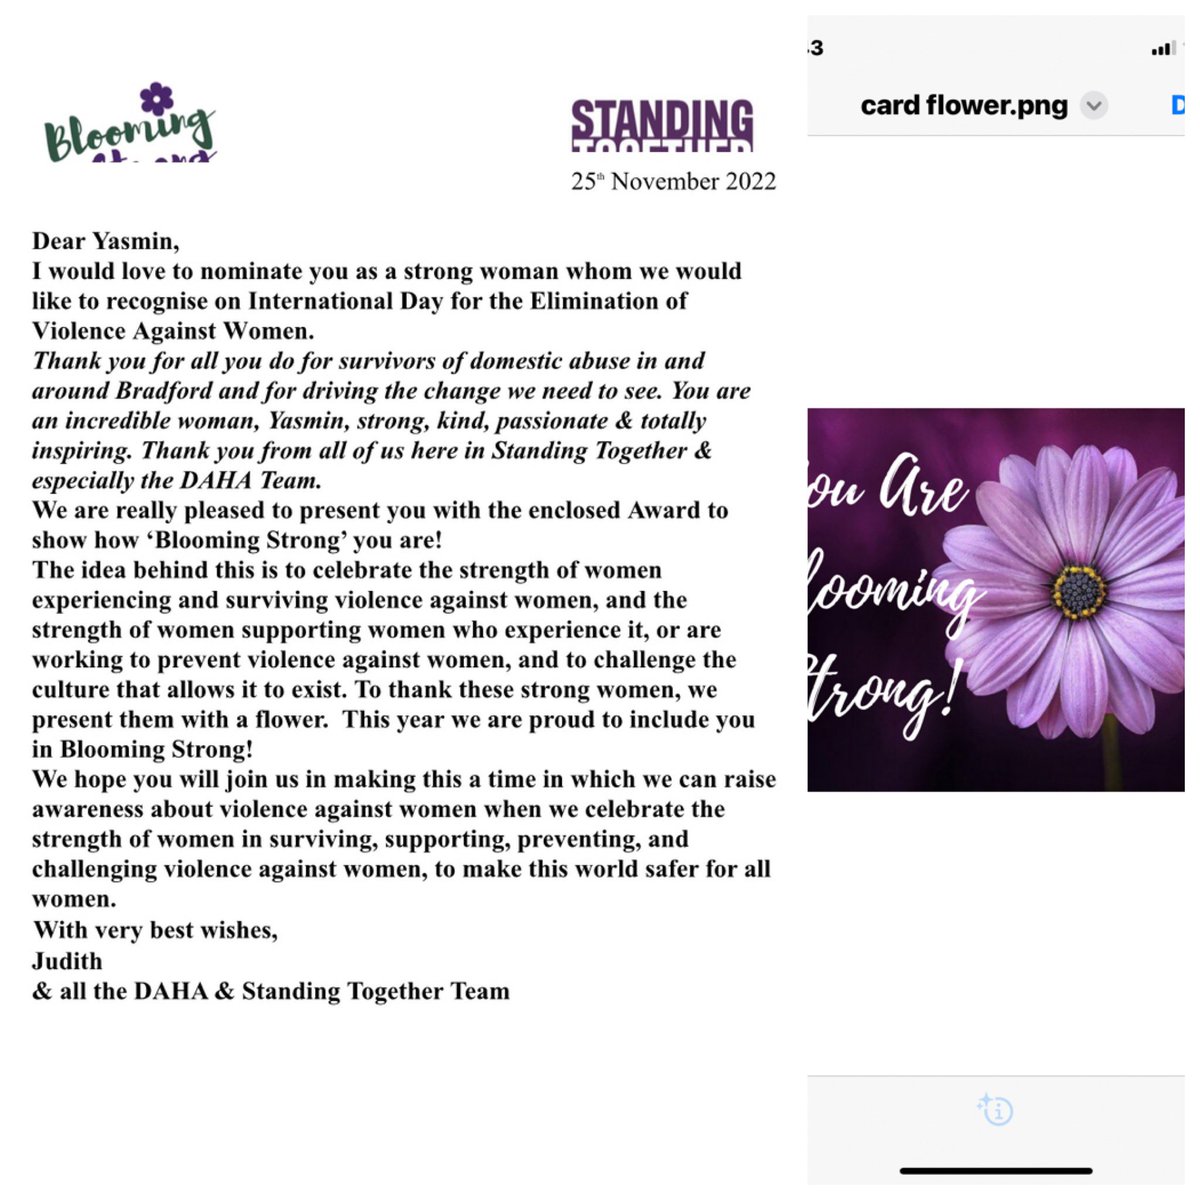 During #IDEVAW2022 I am pleased to receive this Blooming Strong nomination from the fabulous @judith_vickress 
@STagainstDA_  @DAHAlliance thanks😊 its a great way to end my week. This recognition is for all the amazing women leaders & our allies in our effort to #EVAWG #16days